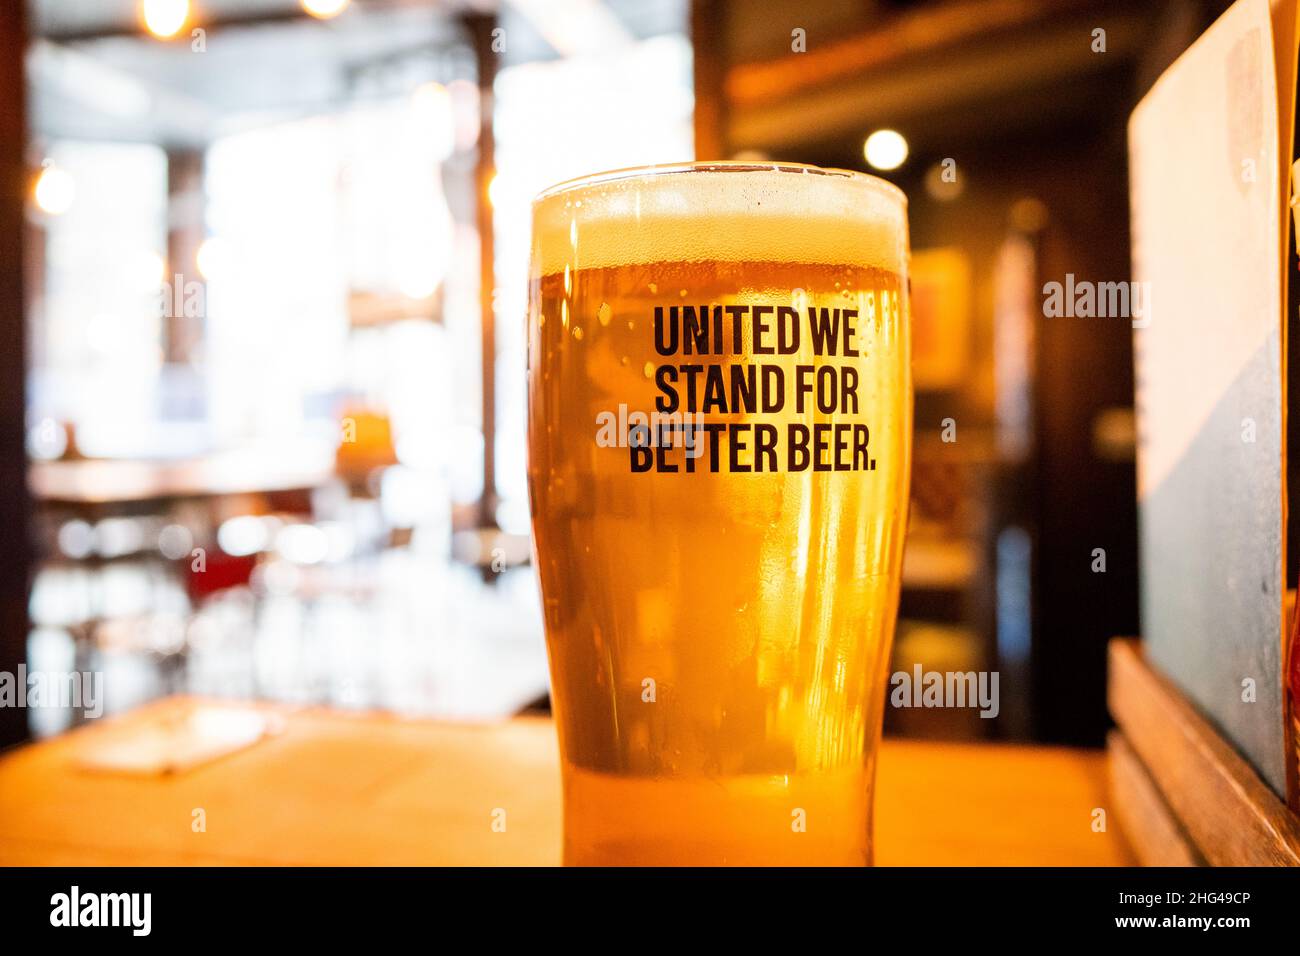 Newcastle UK - 18th Oct 2021 - Pint of craft beer in a Brewdog bar, no logos. United We Stand for Better Beer caption on full glass Stock Photo